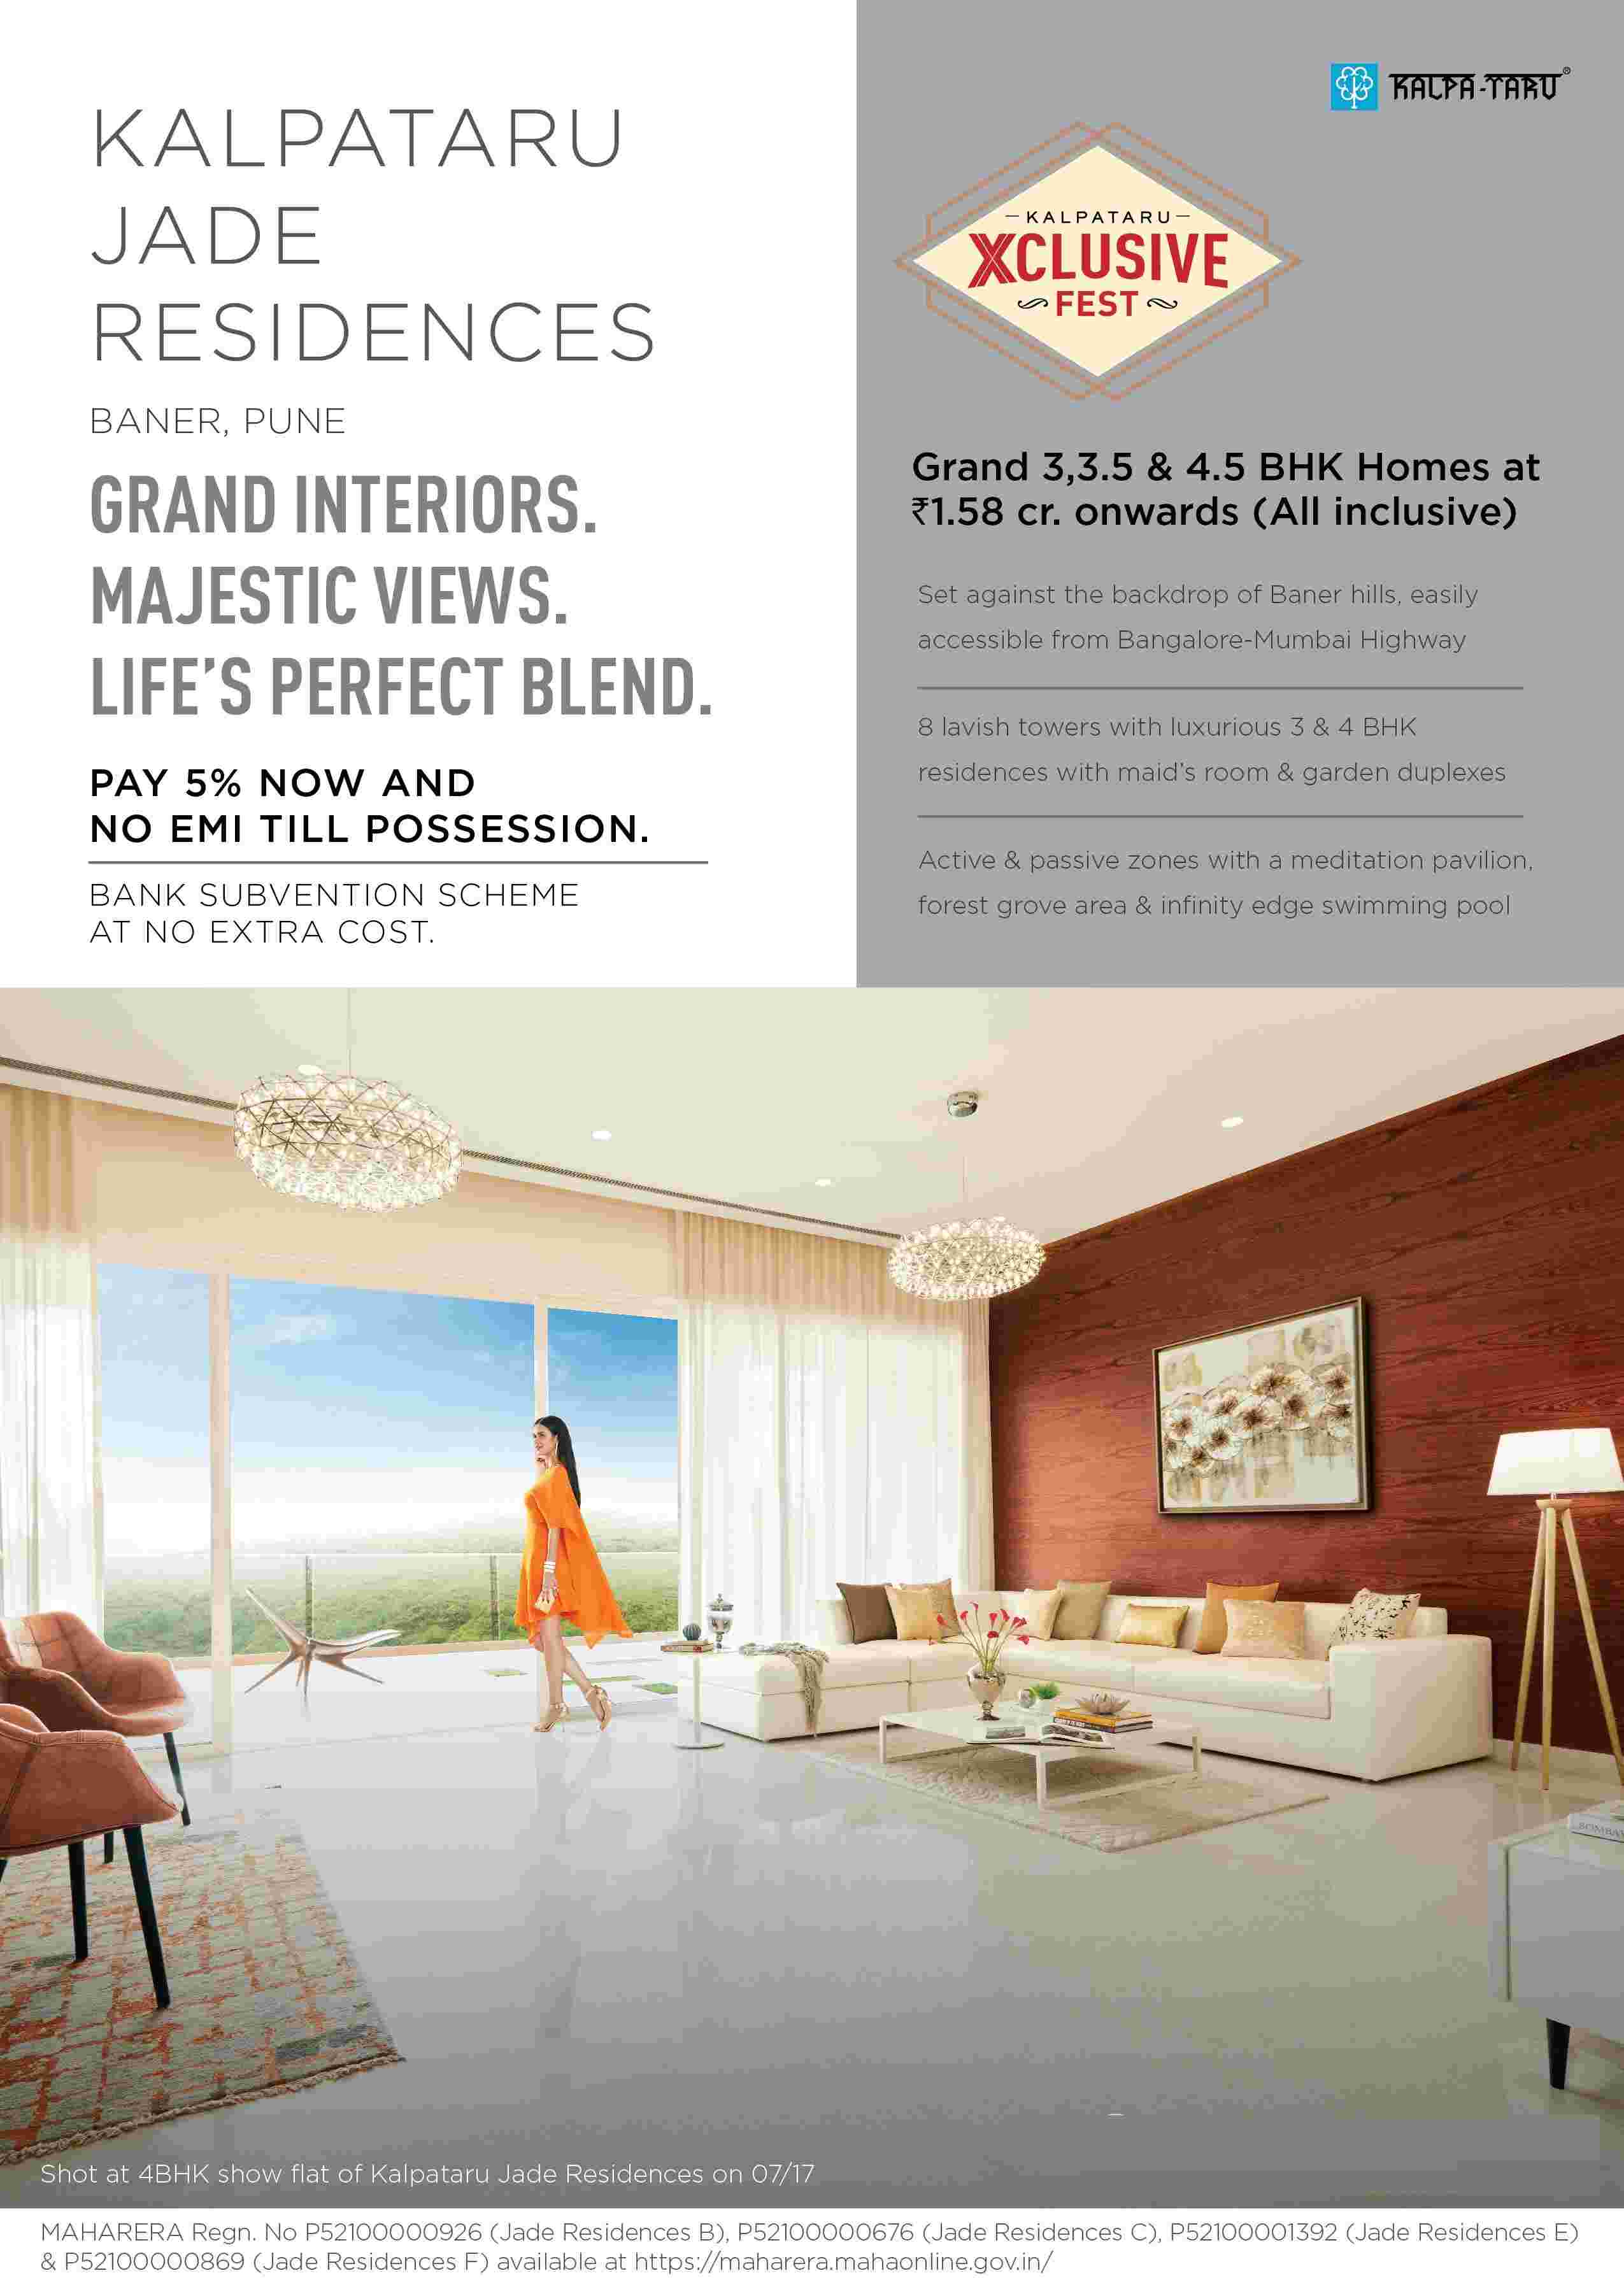 Enjoy the grand life by paying just 5% at Kalpataru Jade Residences in Pune